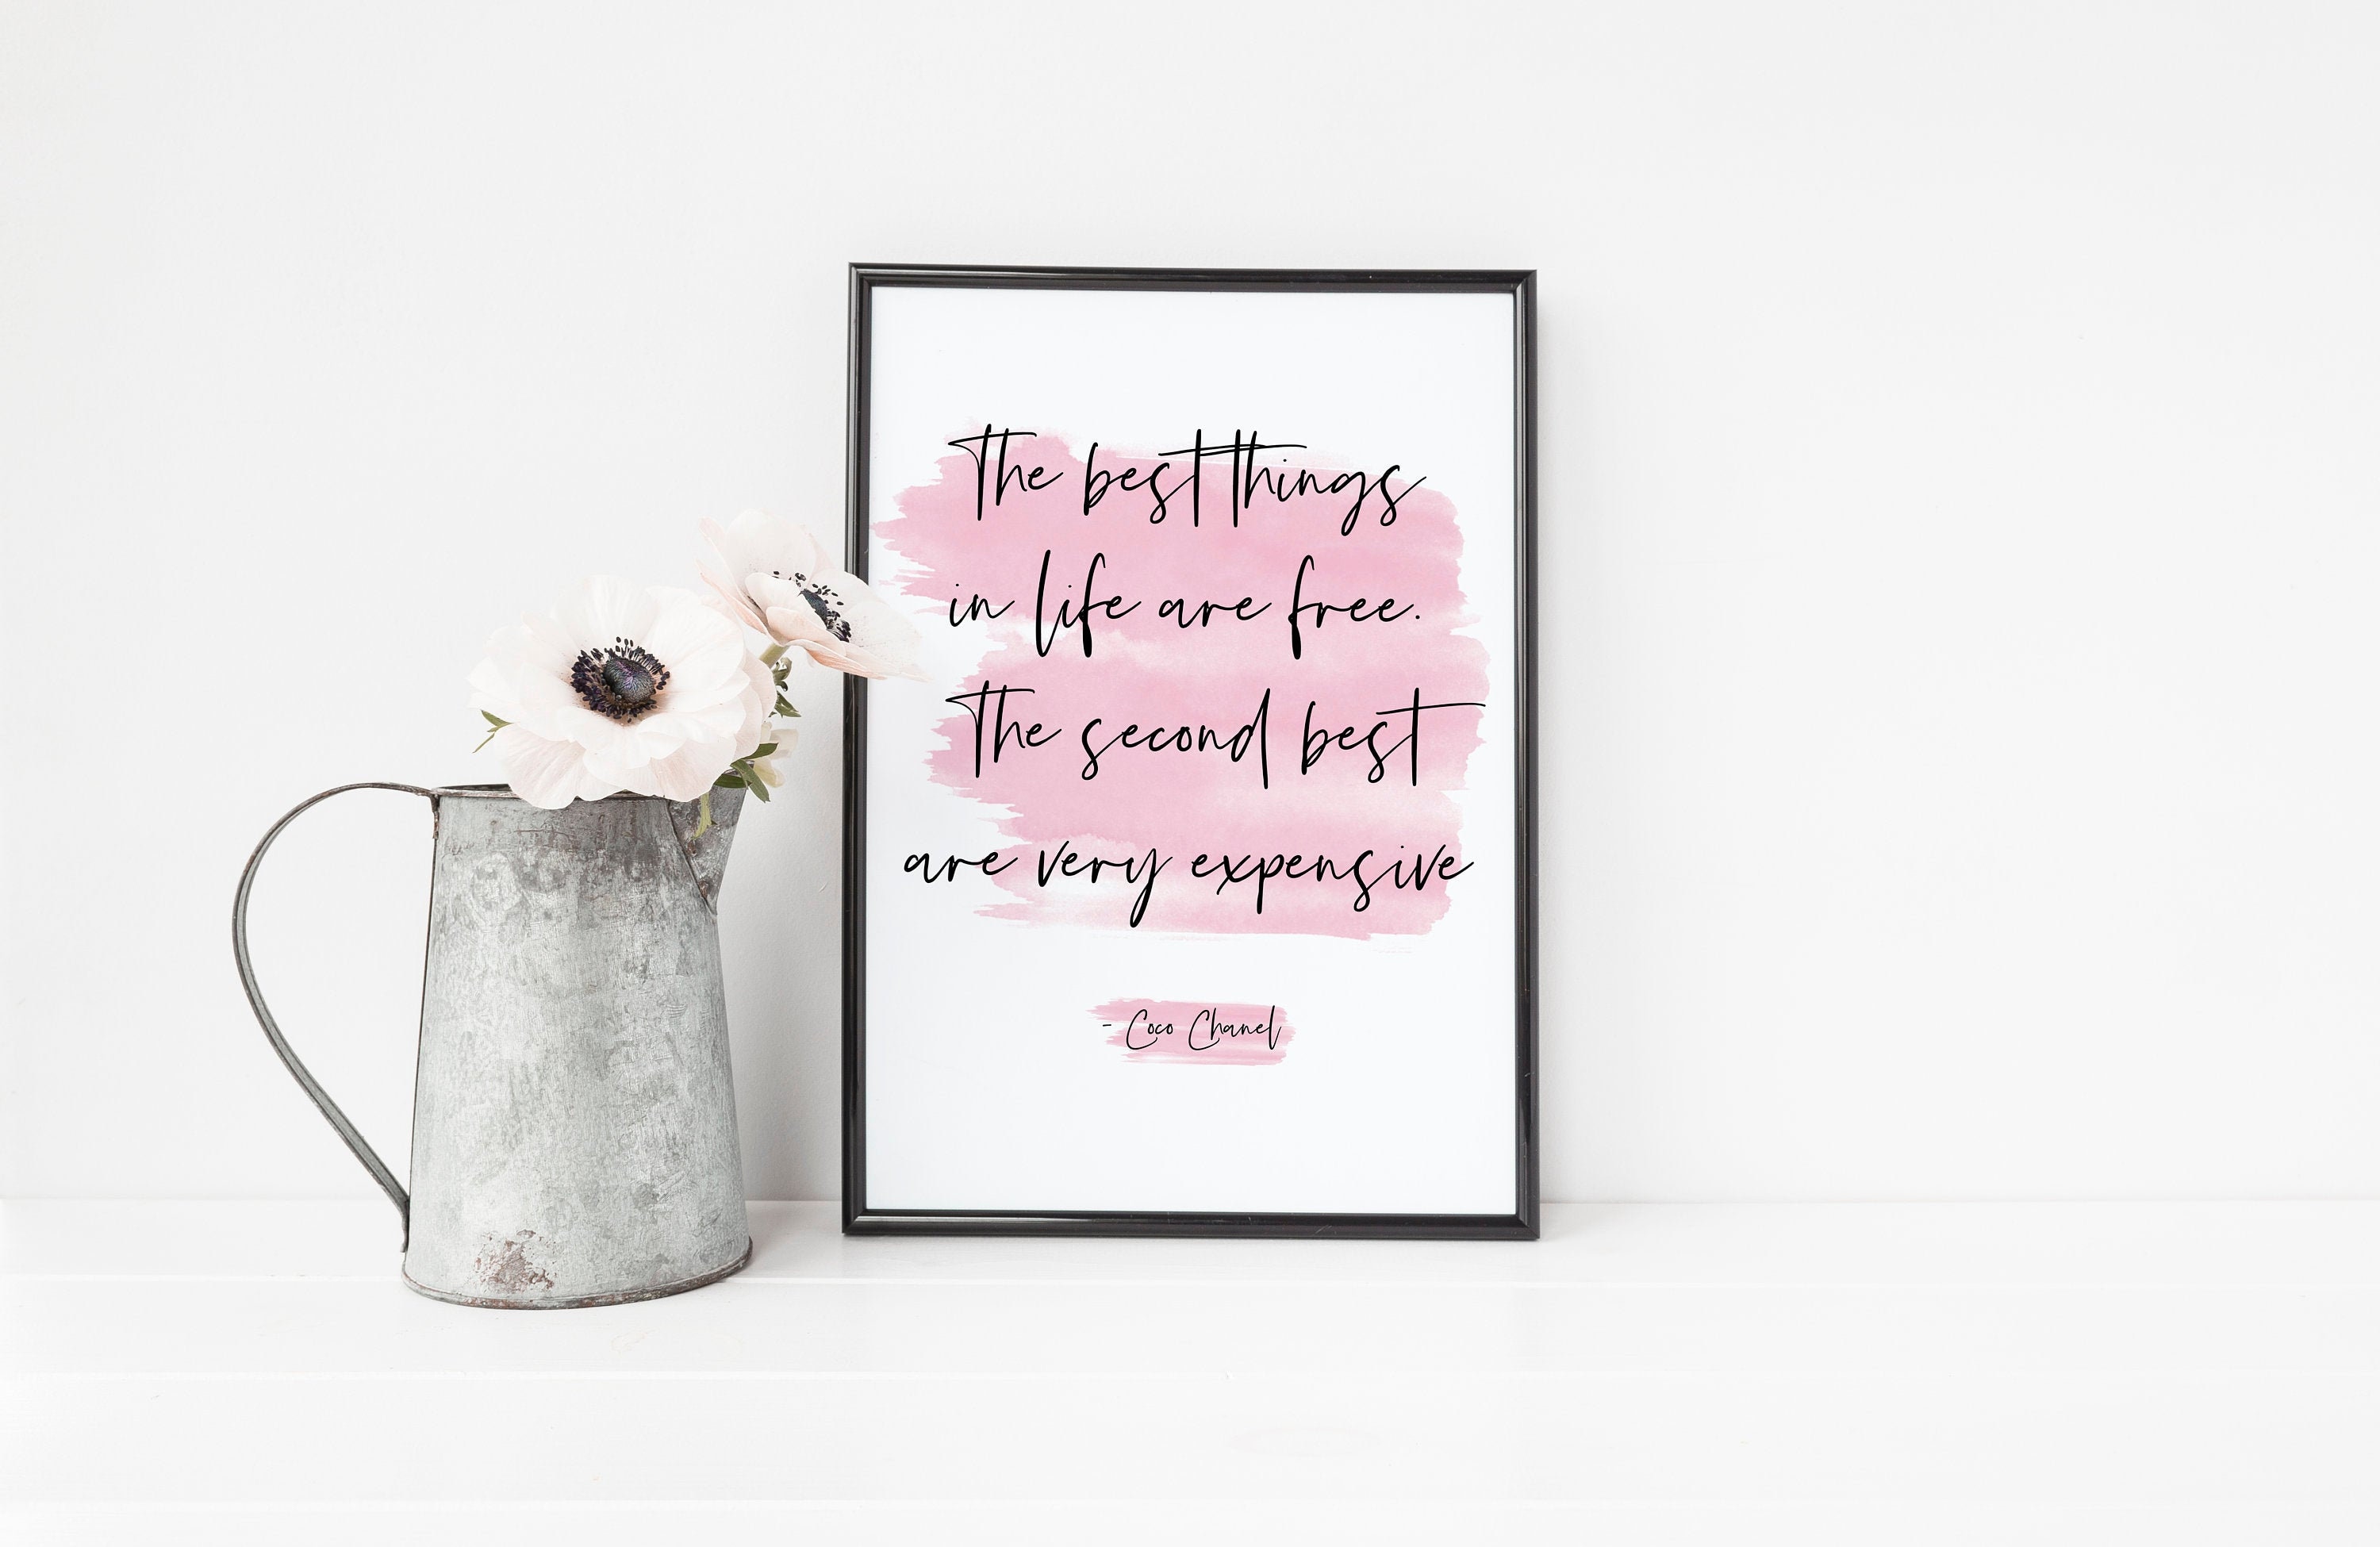 The best things in life are free. Coco Chanel. | Photographic Print